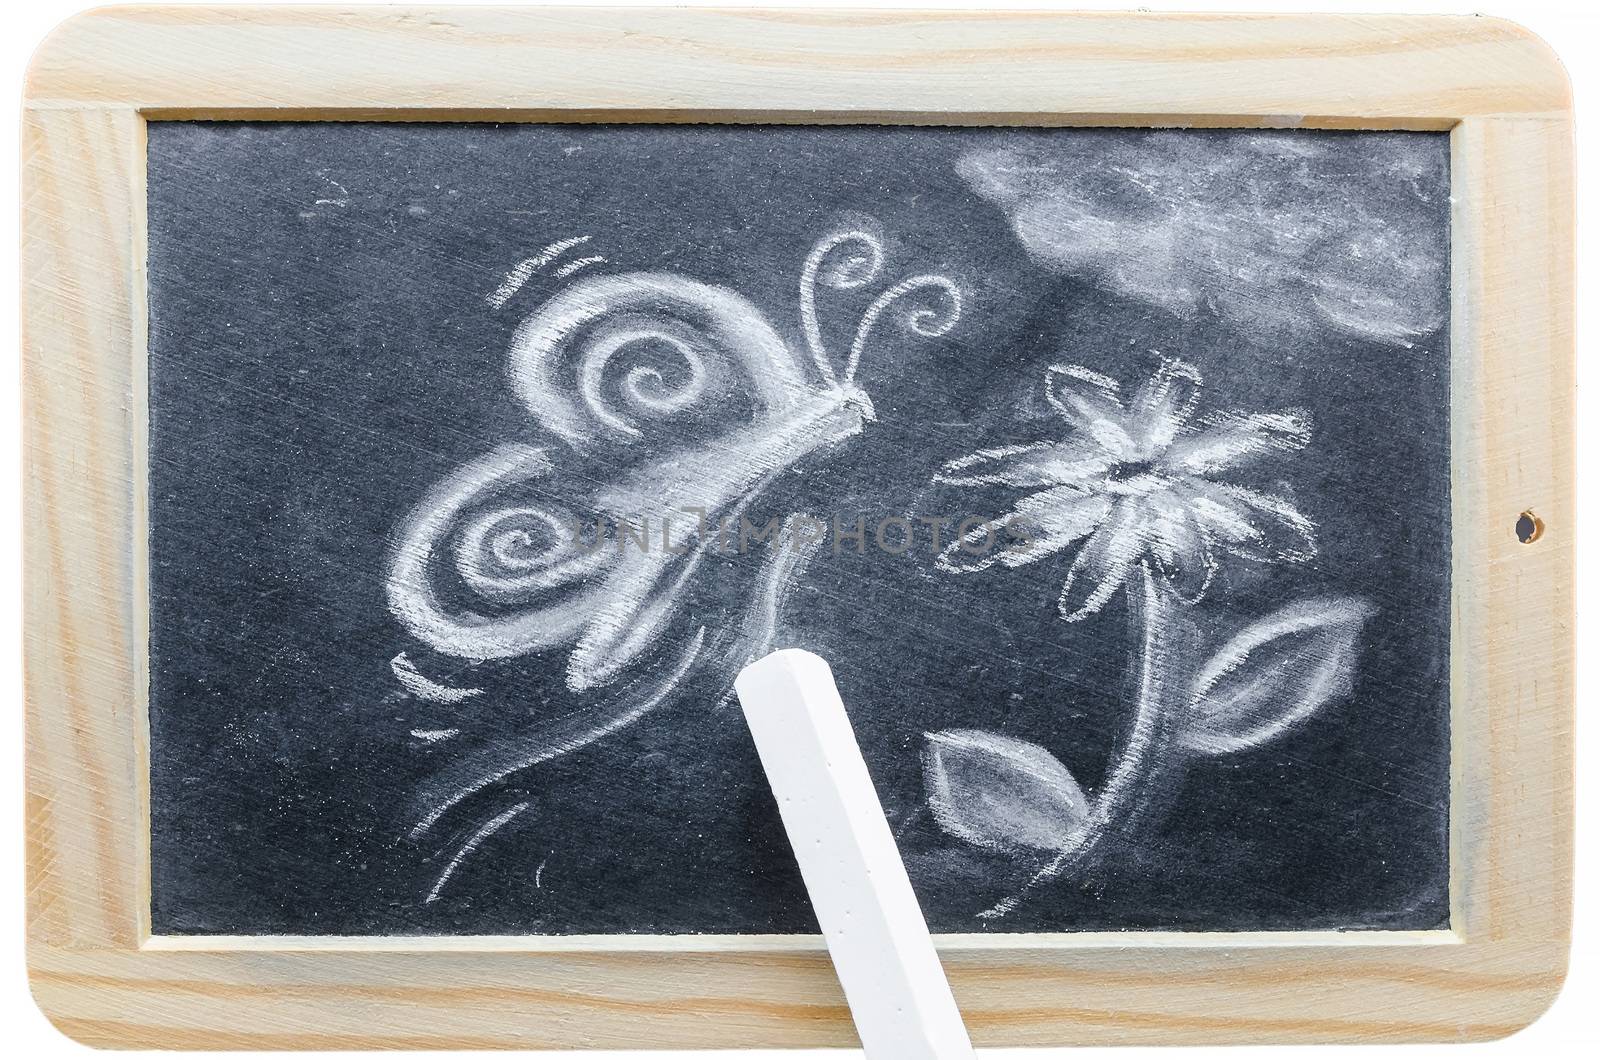 Chalk drawing by JFsPic